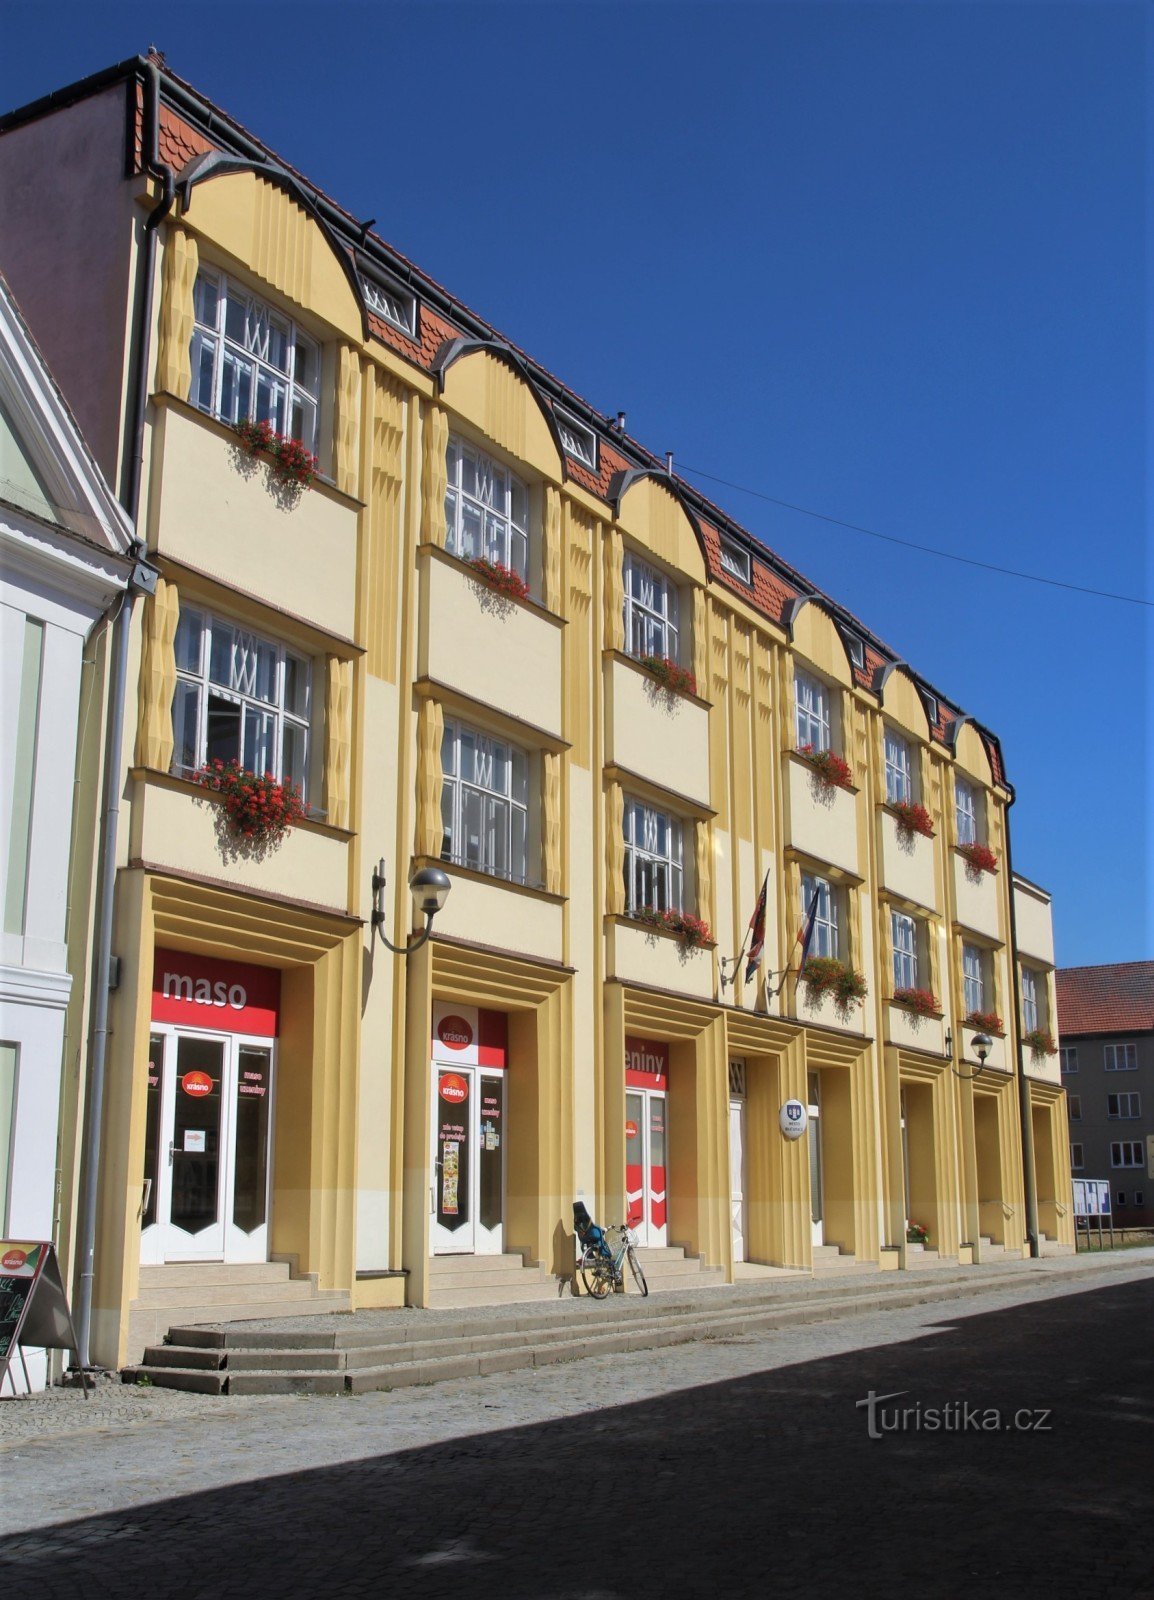 Bučovice - Information and cultural center